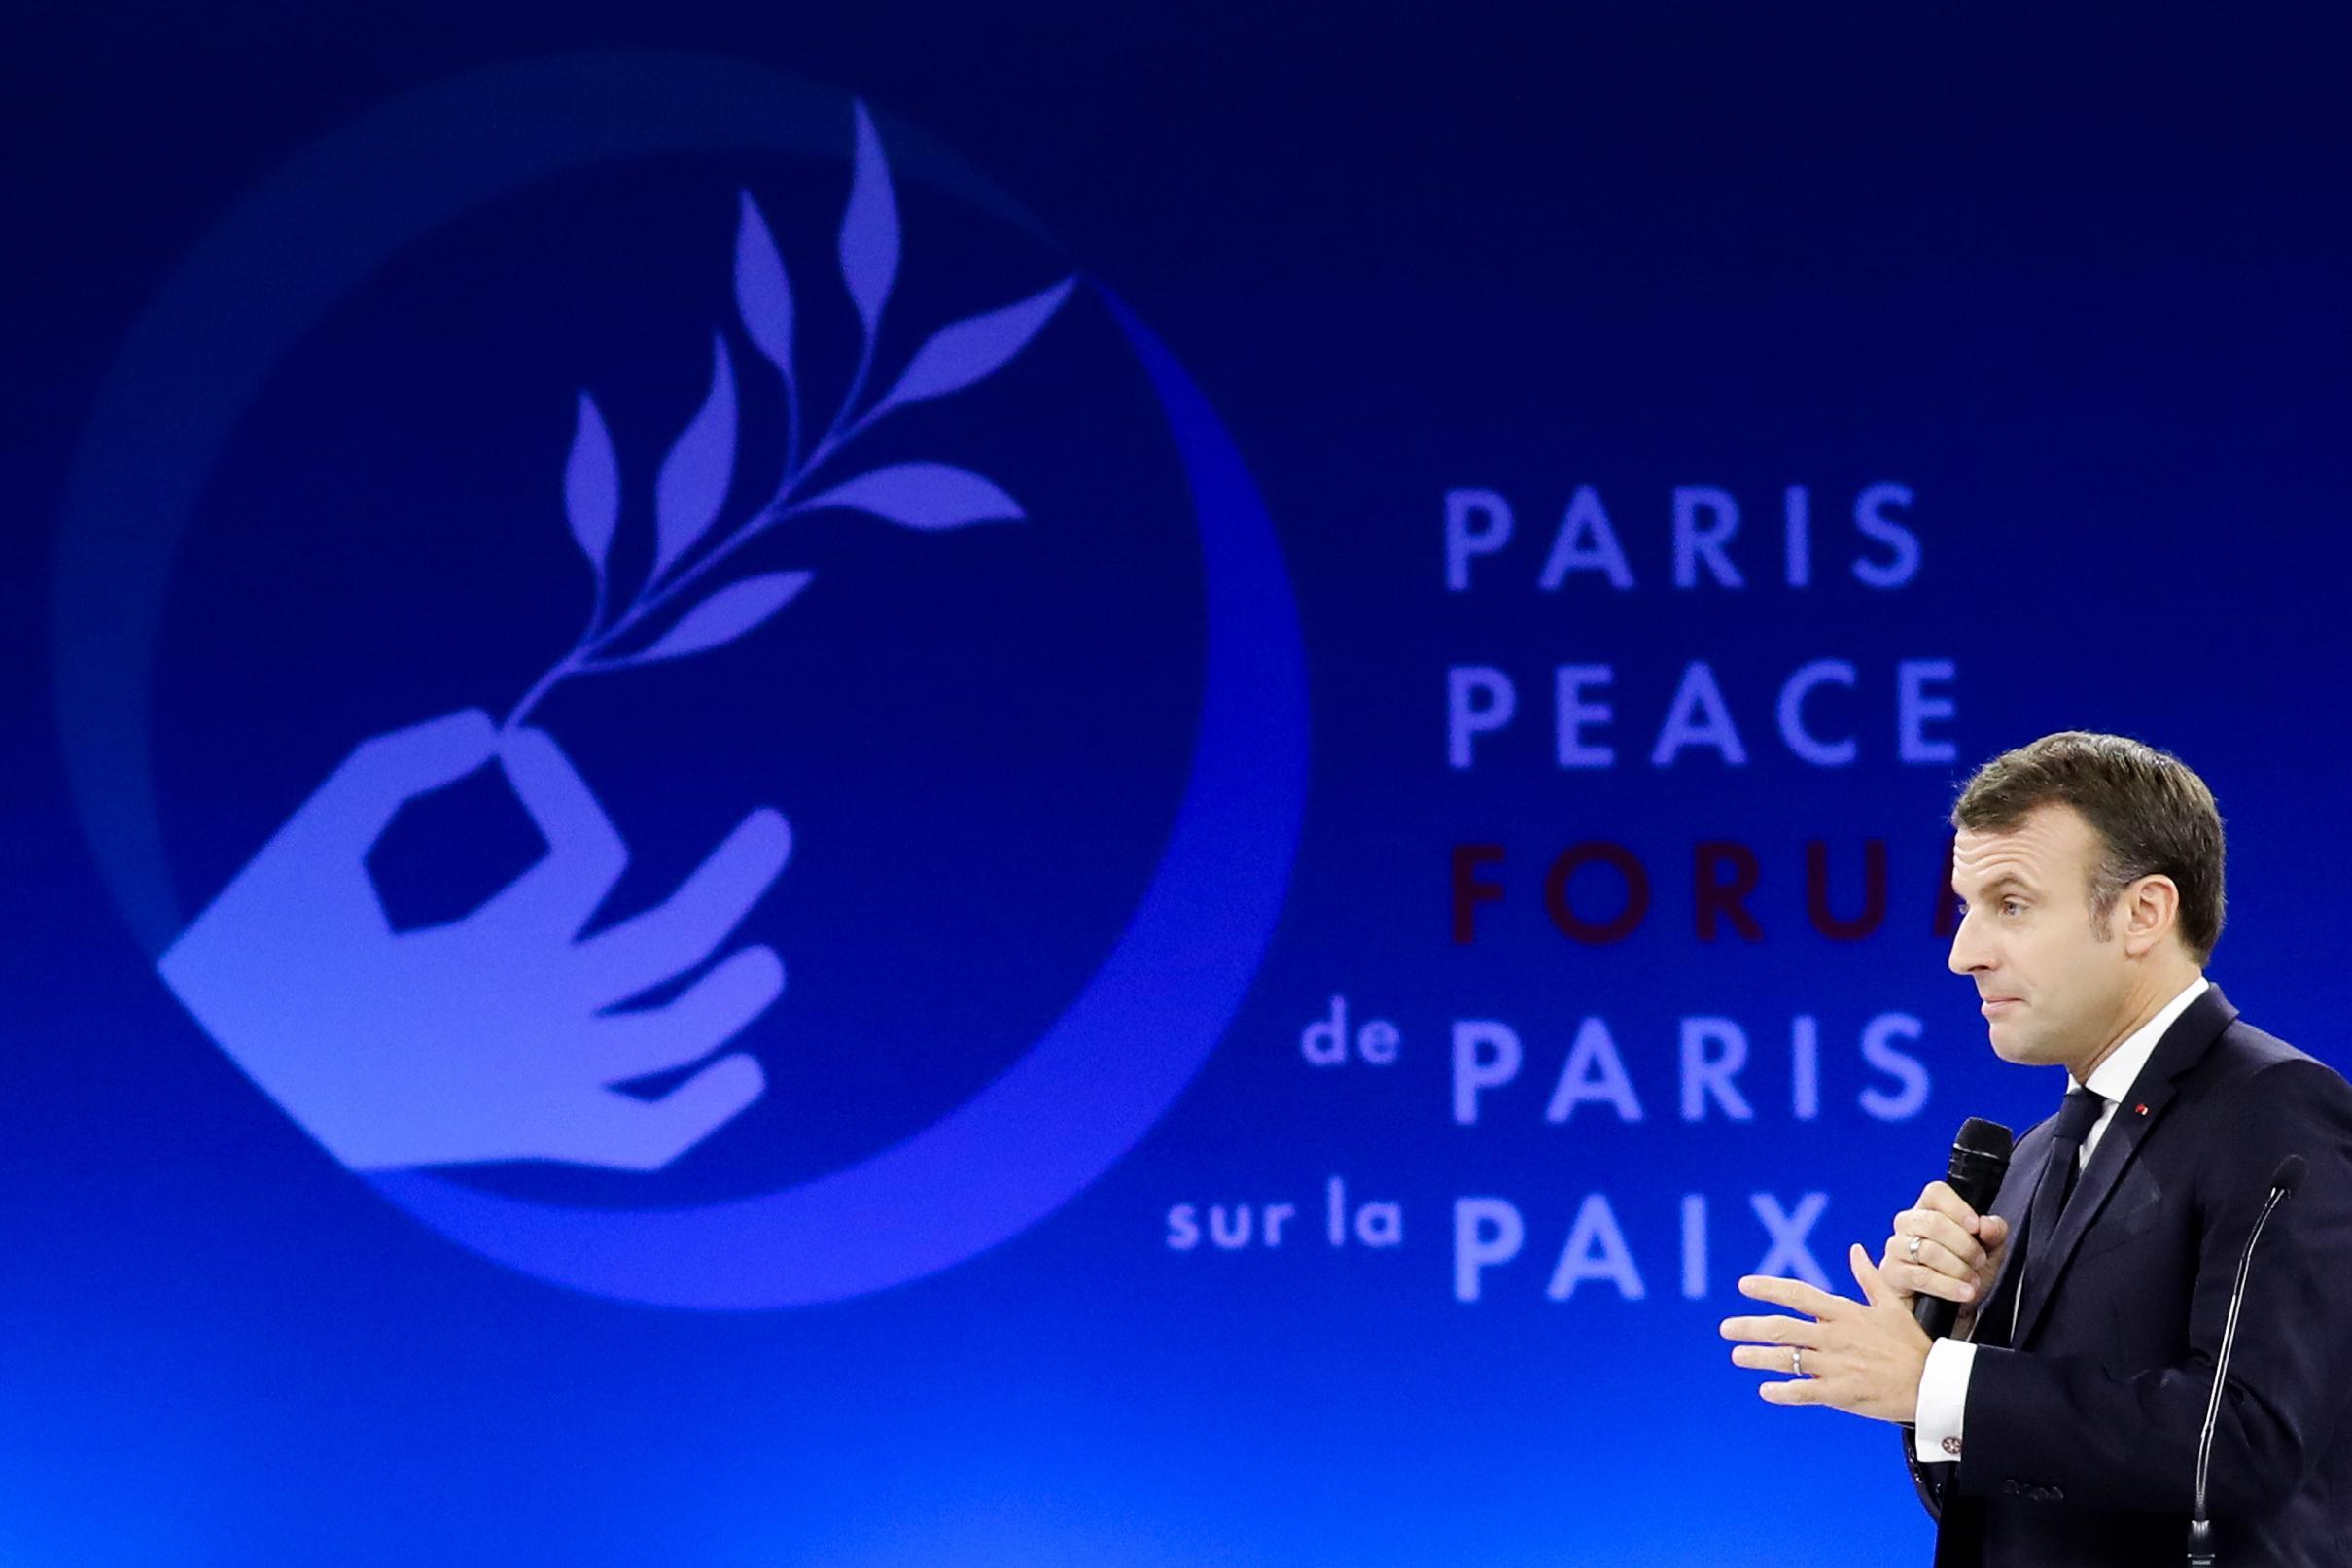 epa07990282 French President Emmanuel Macron delivers a speech during the plenary session of the Paris Peace Forum, in Paris, France, 12 November 2019. The international event on global governance issues and multilateralism takes place on 12 to 13 November in Paris.  EPA/LUDOVIC MARIN / POOL MAXPPP OUT